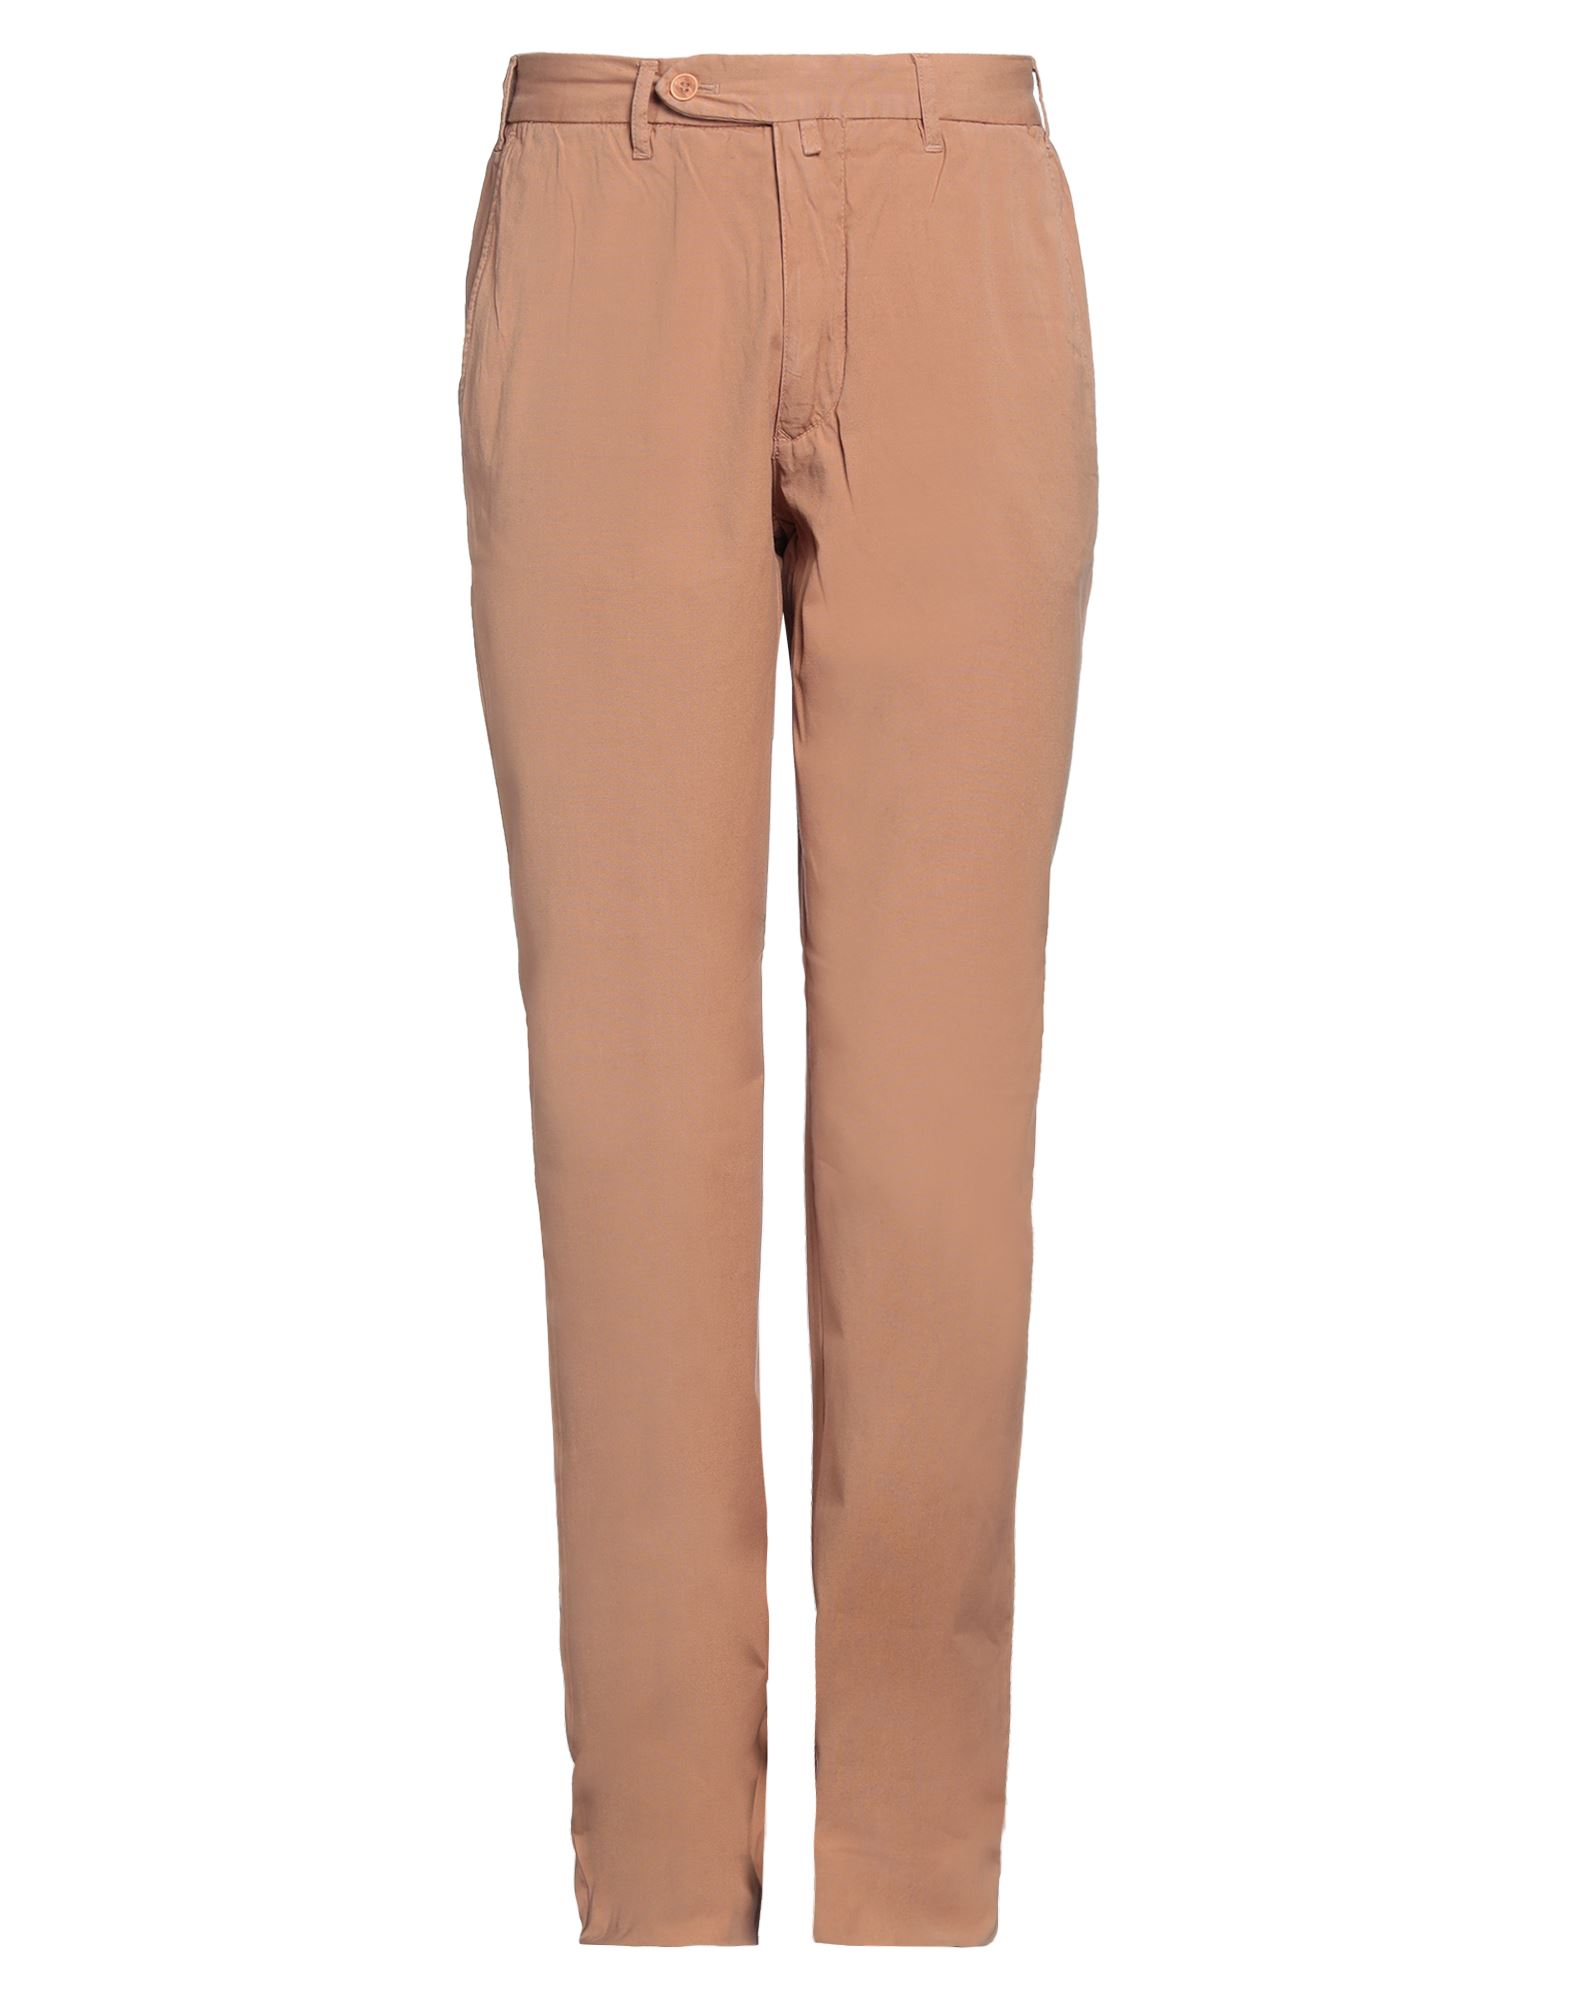 Addiction Pants In Brown